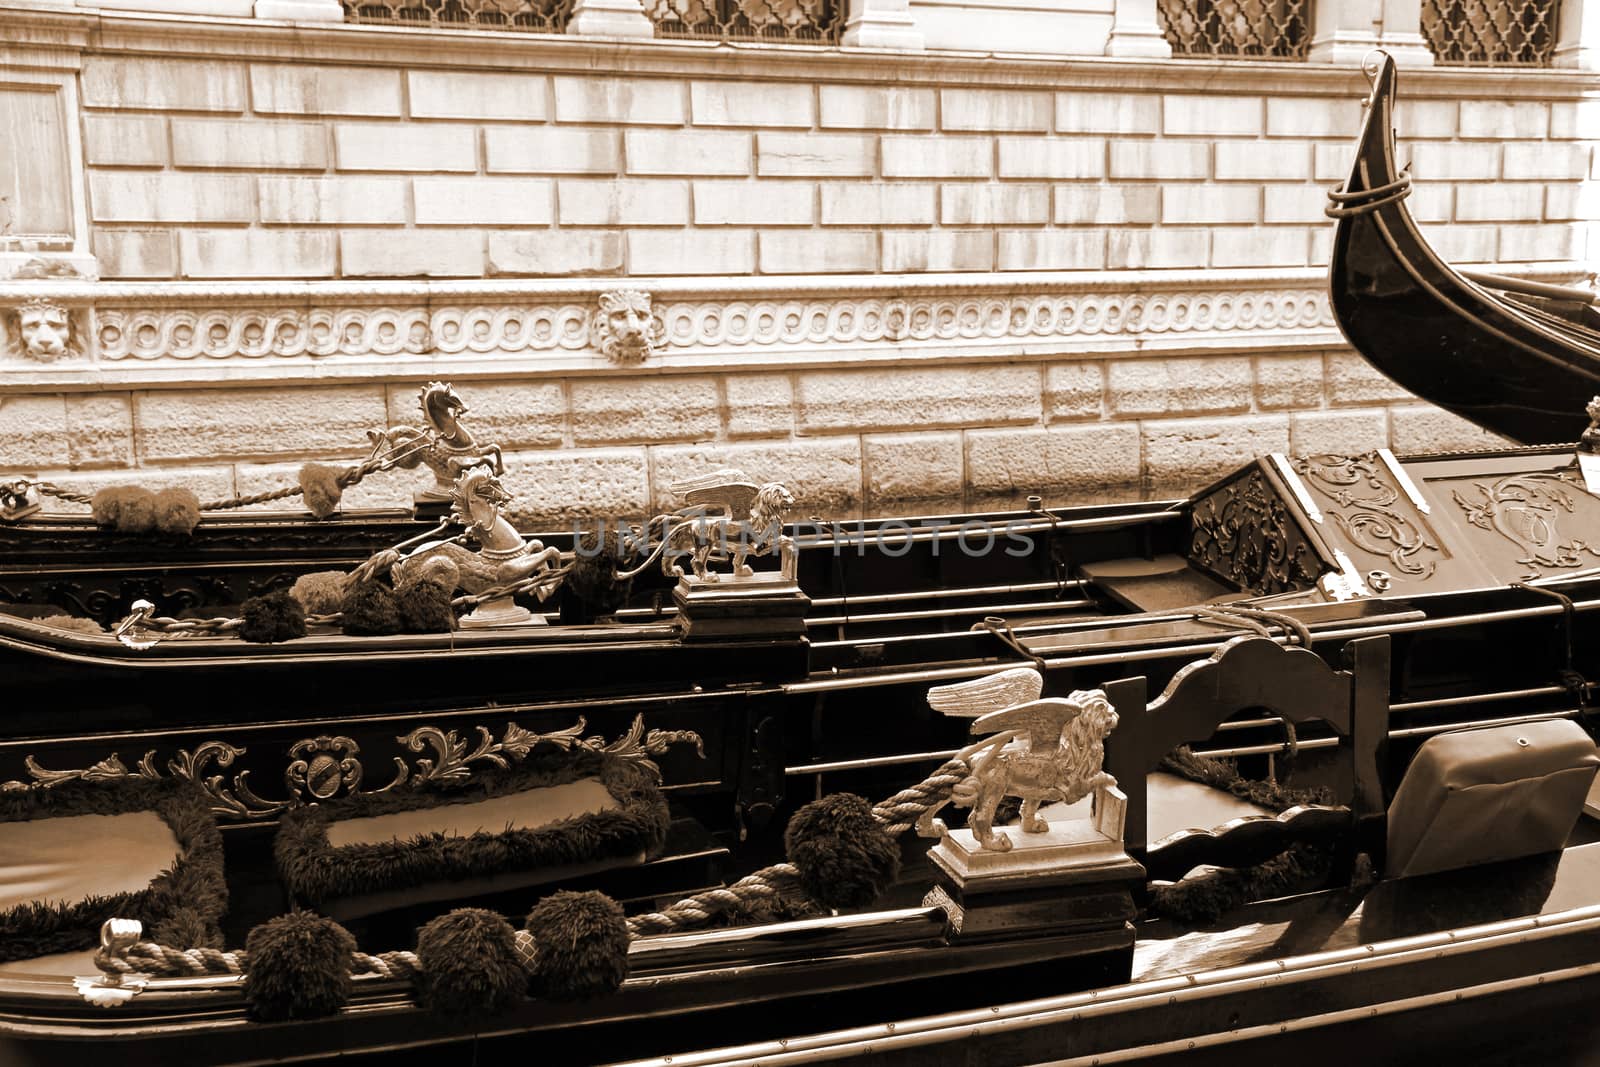 Italy. Venice. Details of typical venitian gondolas. . In Sepia  by oxanatravel